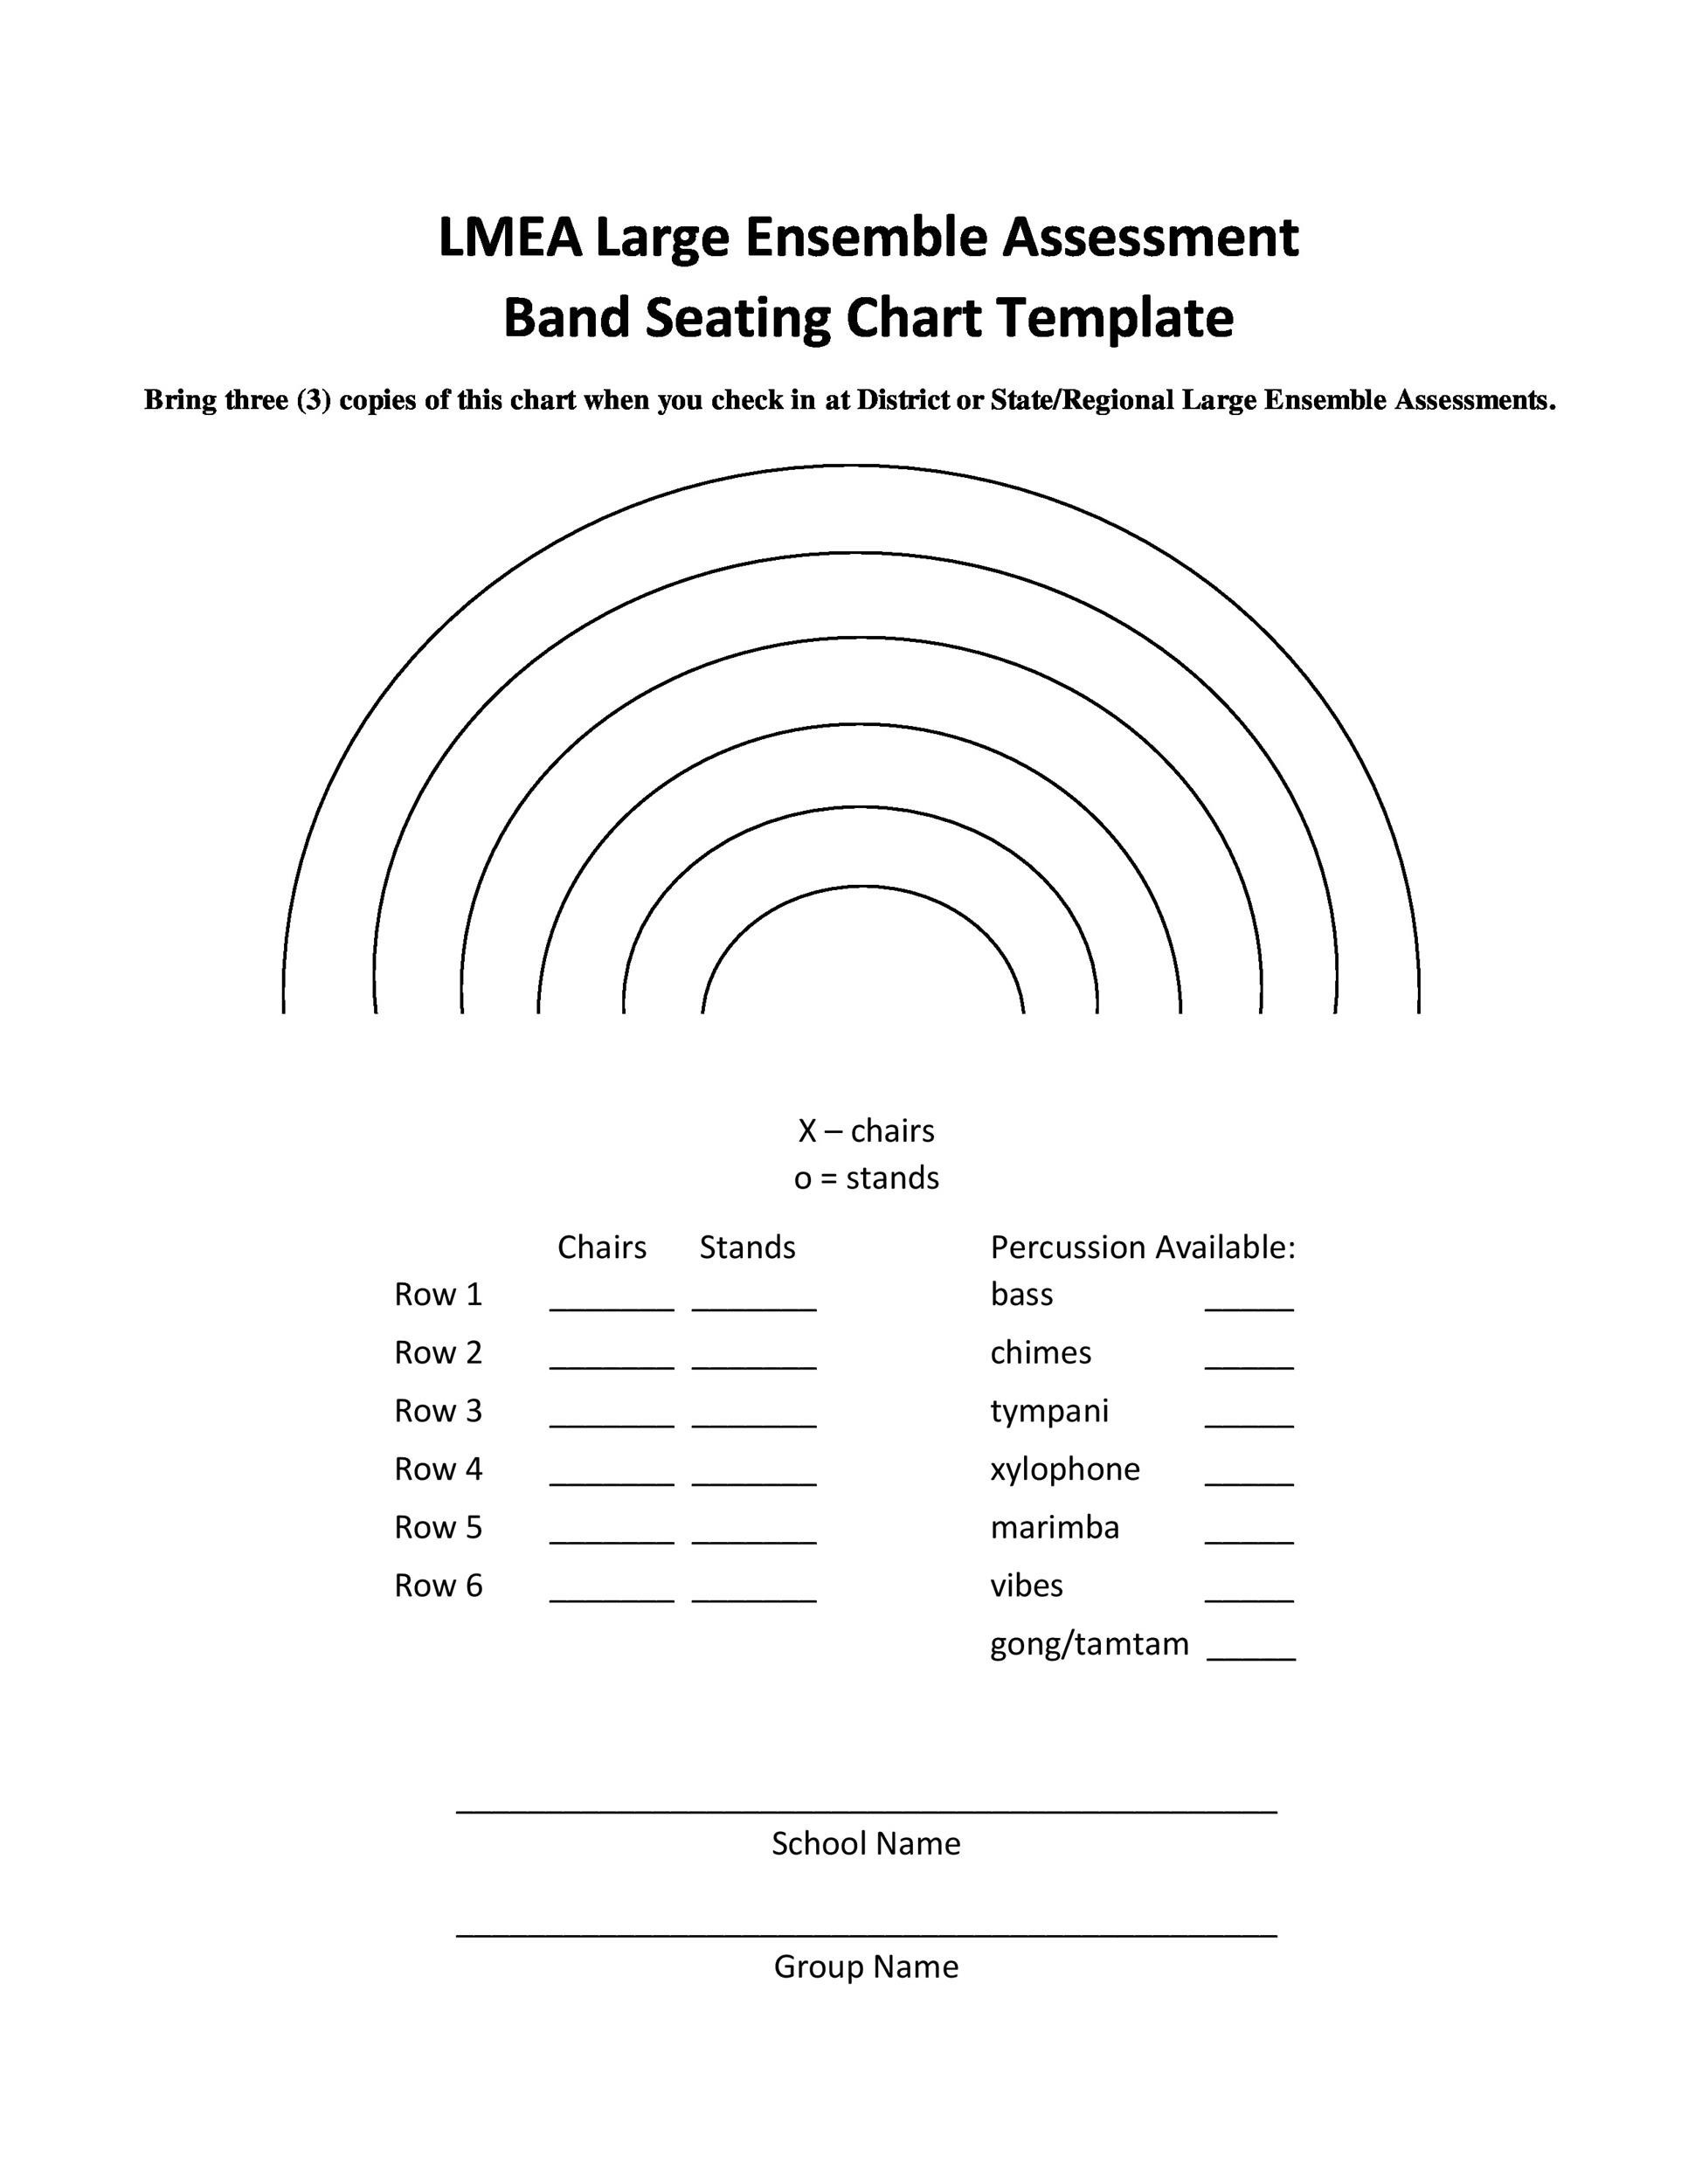 Concert Band Seating Chart Software